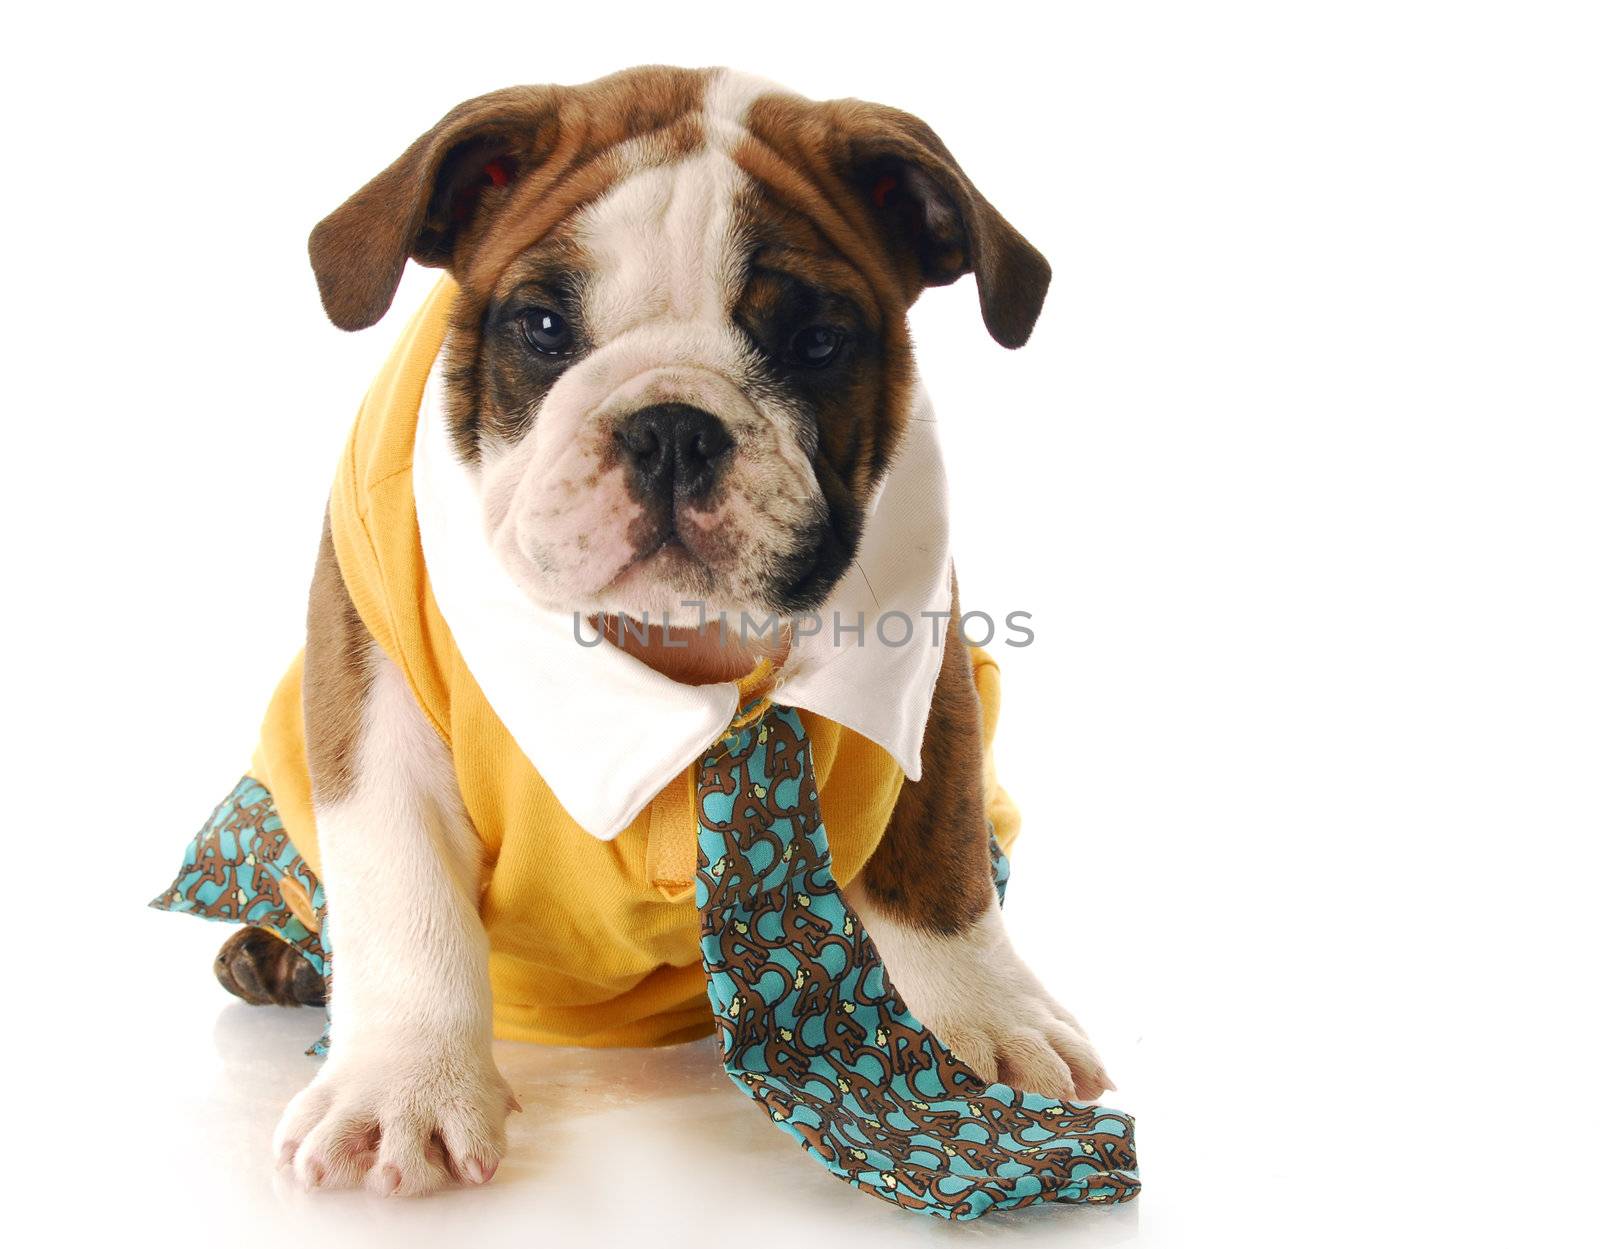 adorable english bulldog puppy dressed up wearing shirt and tie with reflection on white background